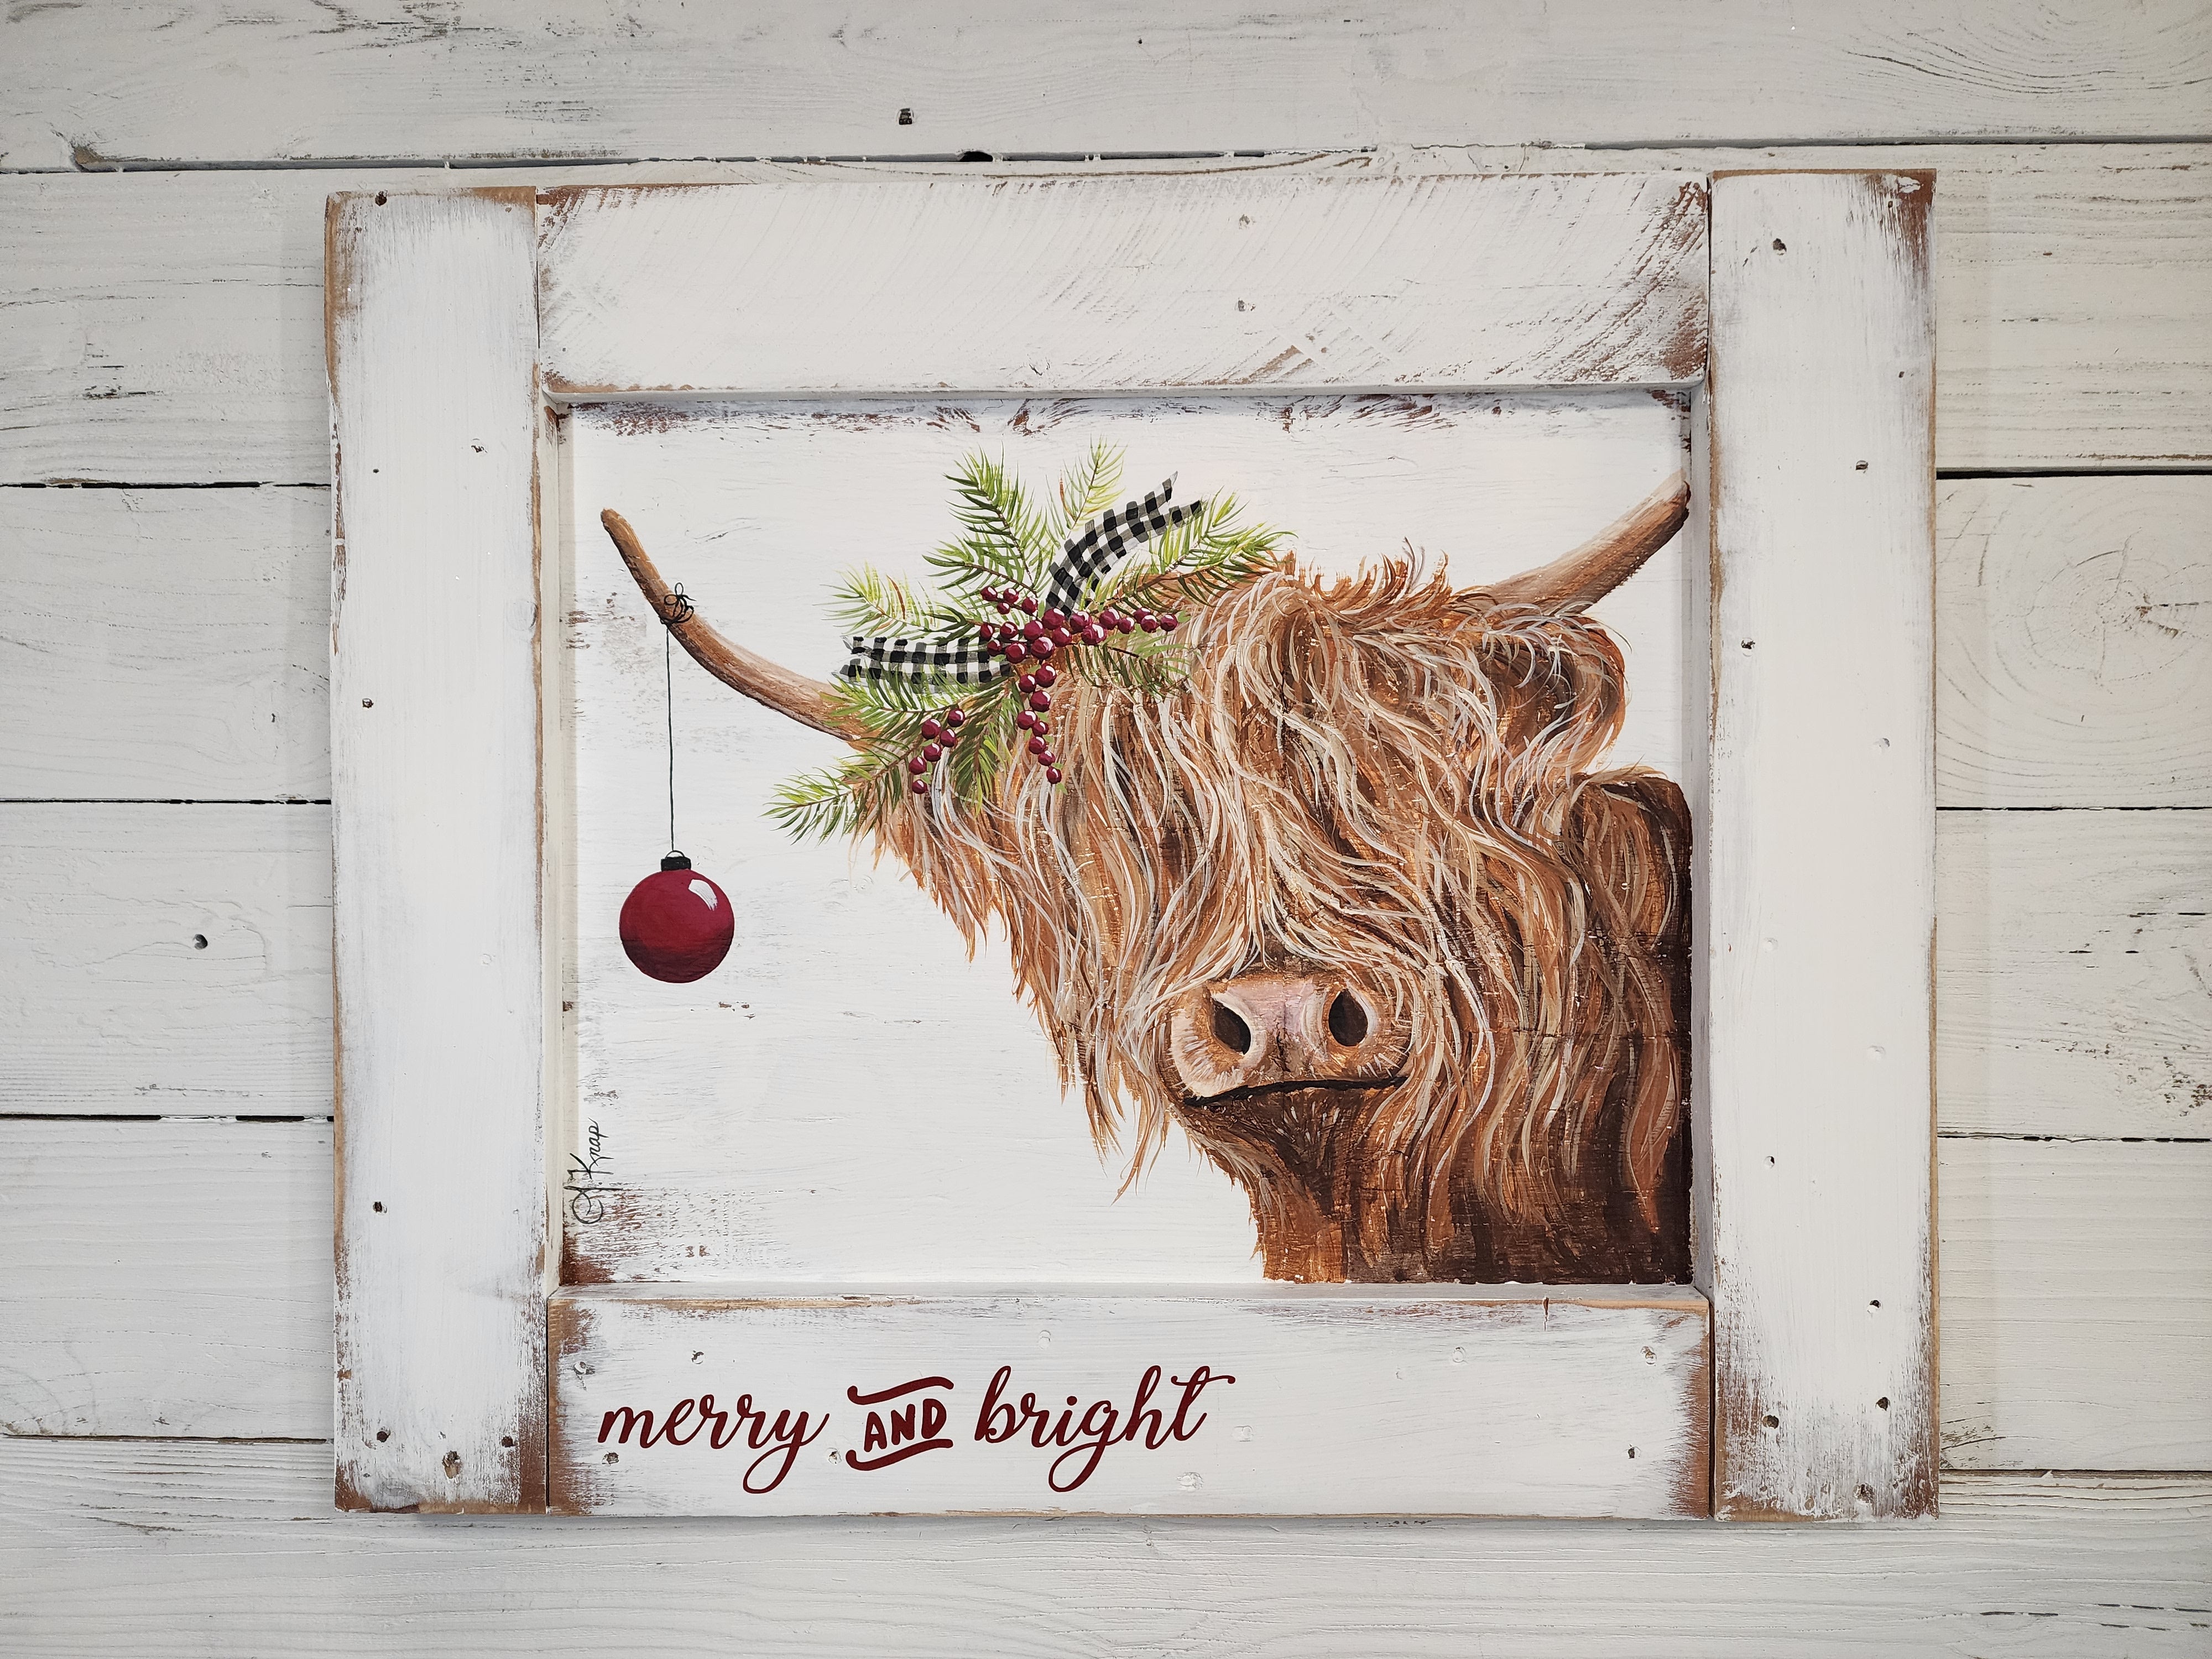 Christmas Highland cow with everygreens and red berries, hand painted, Merry and Bright, pine branch with buffalo plaid, Christmas decor